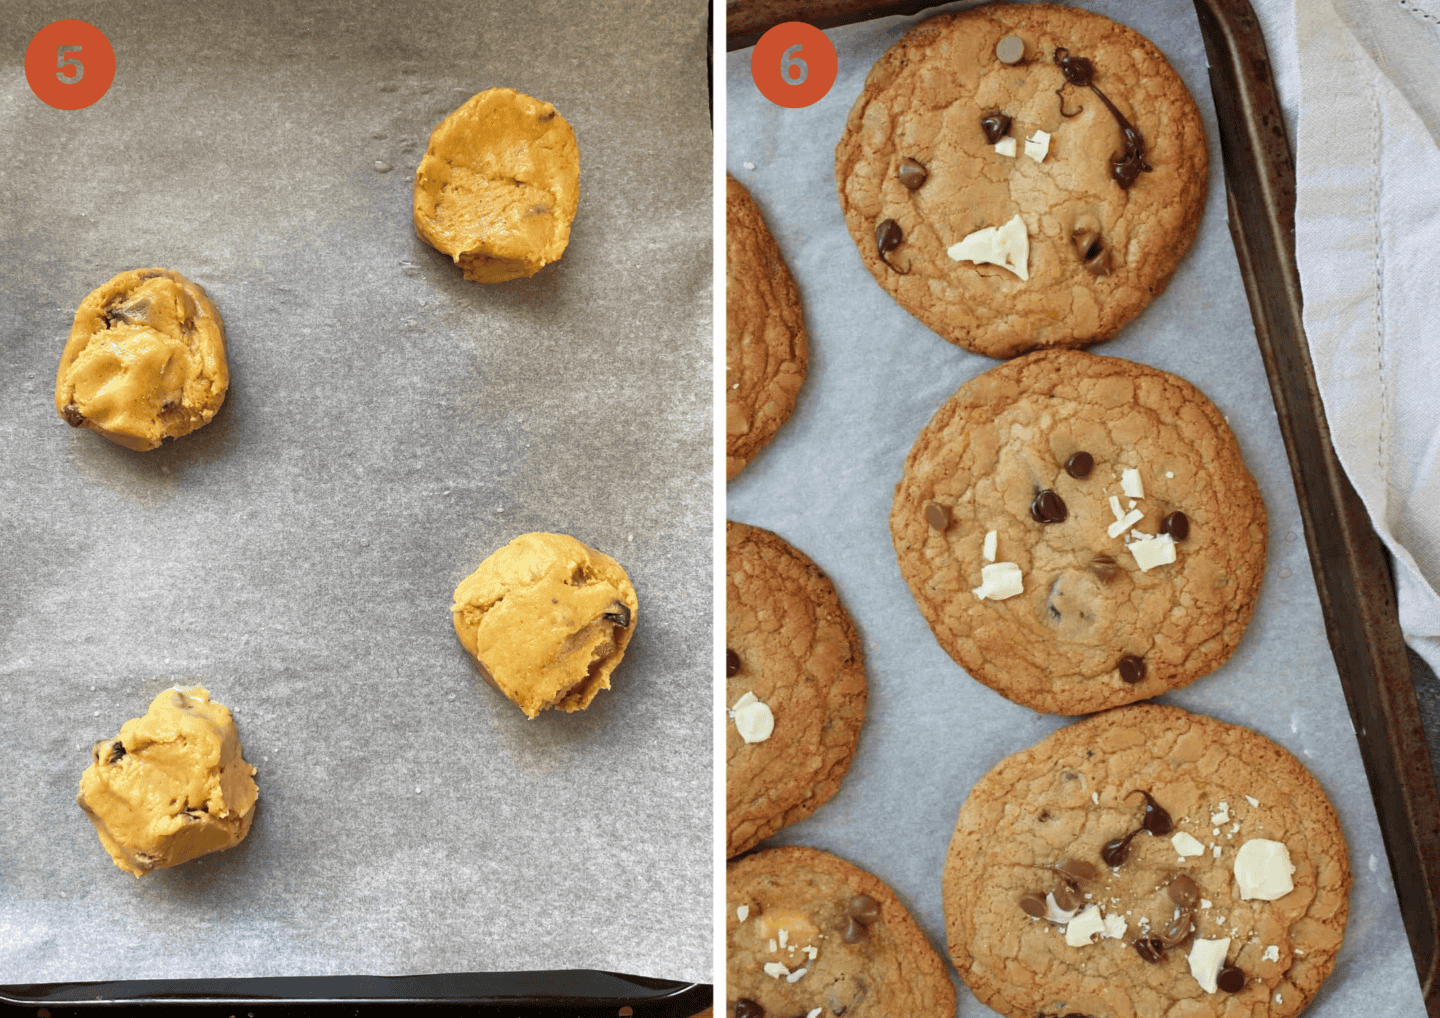 The gluten free cookies before and after baking.